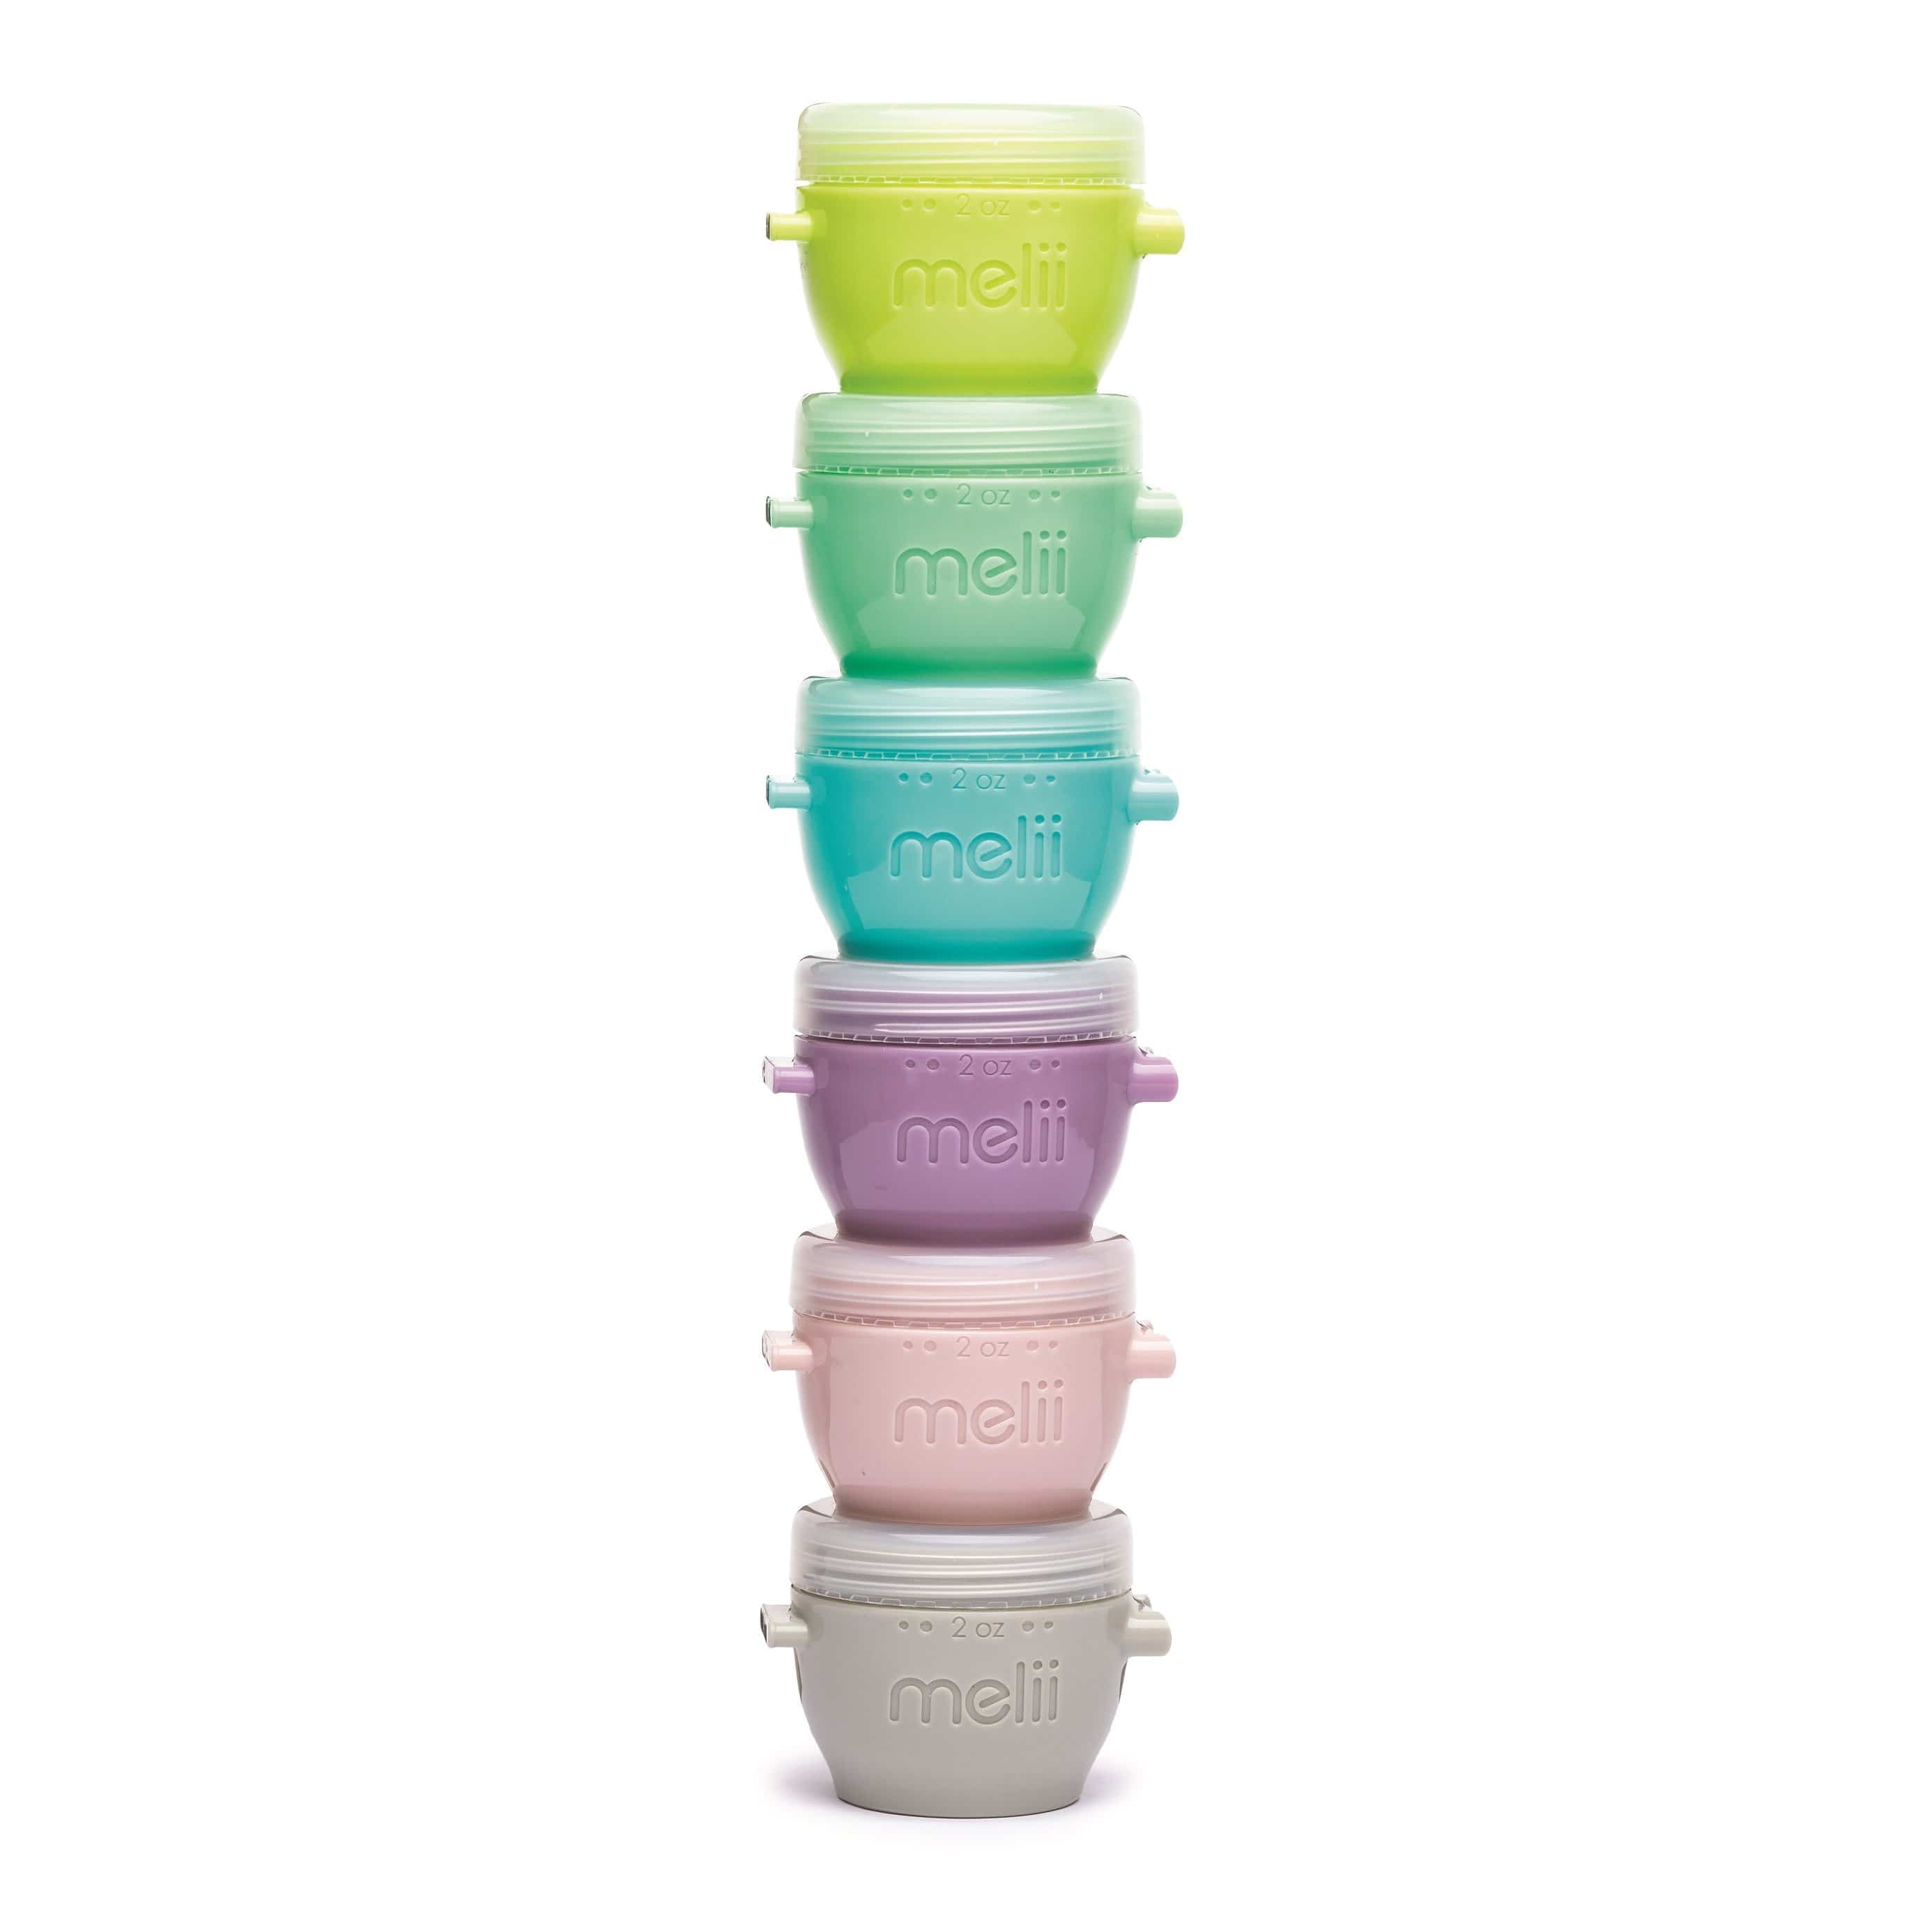 http://www.liltulips.com/cdn/shop/products/2oz-snap-go-pods-6-freezer-snack-containers-melii-lil-tulips-28193855537270.jpg?v=1633484536